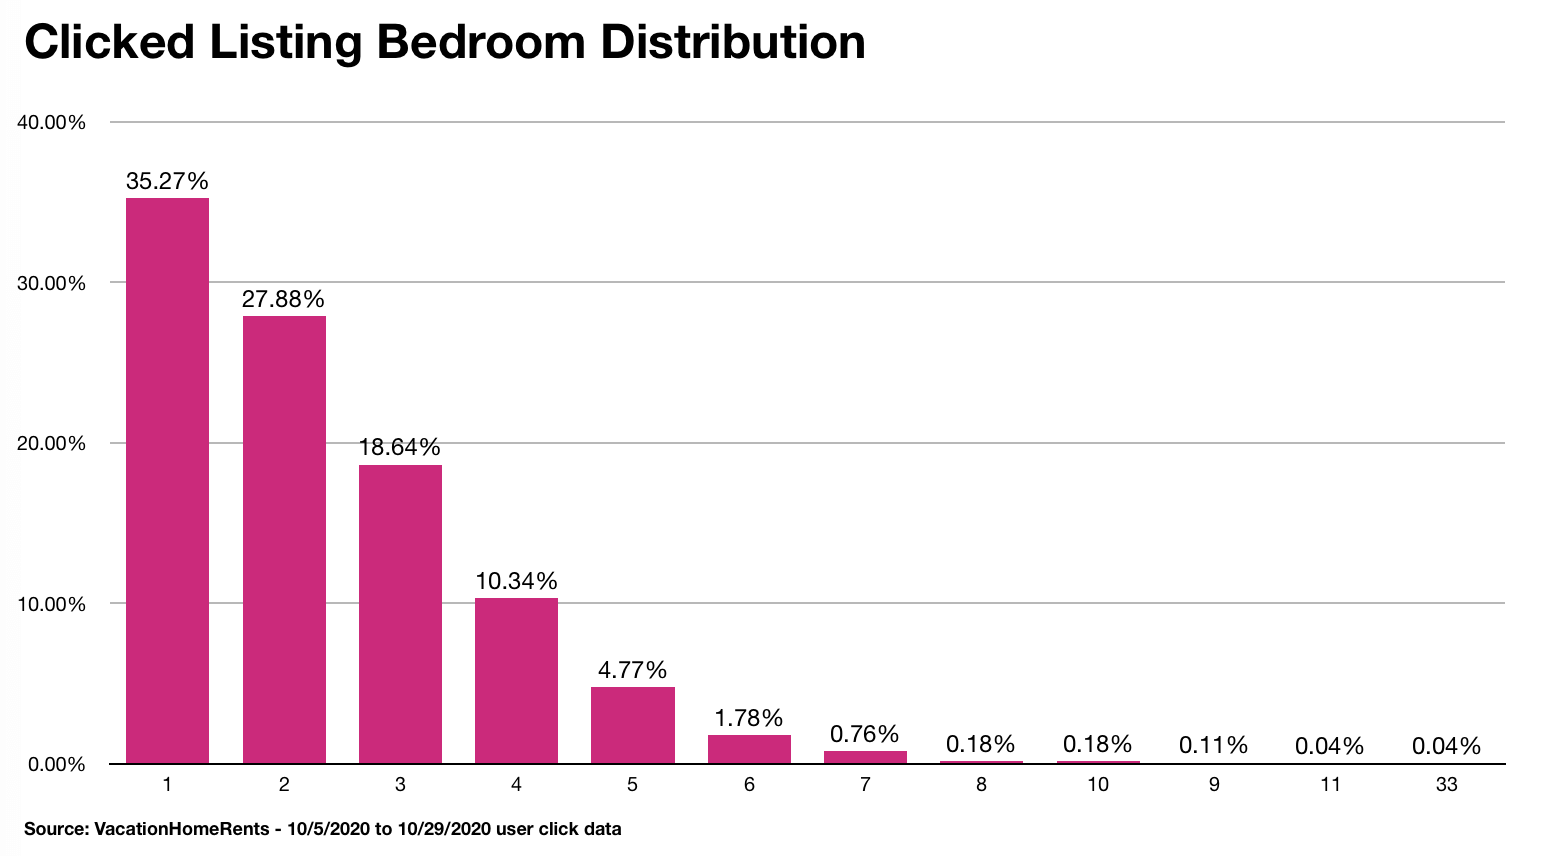 2020 Travel Trends Clicked Number of Bedrooms Distribution by VacationHomeRents.com